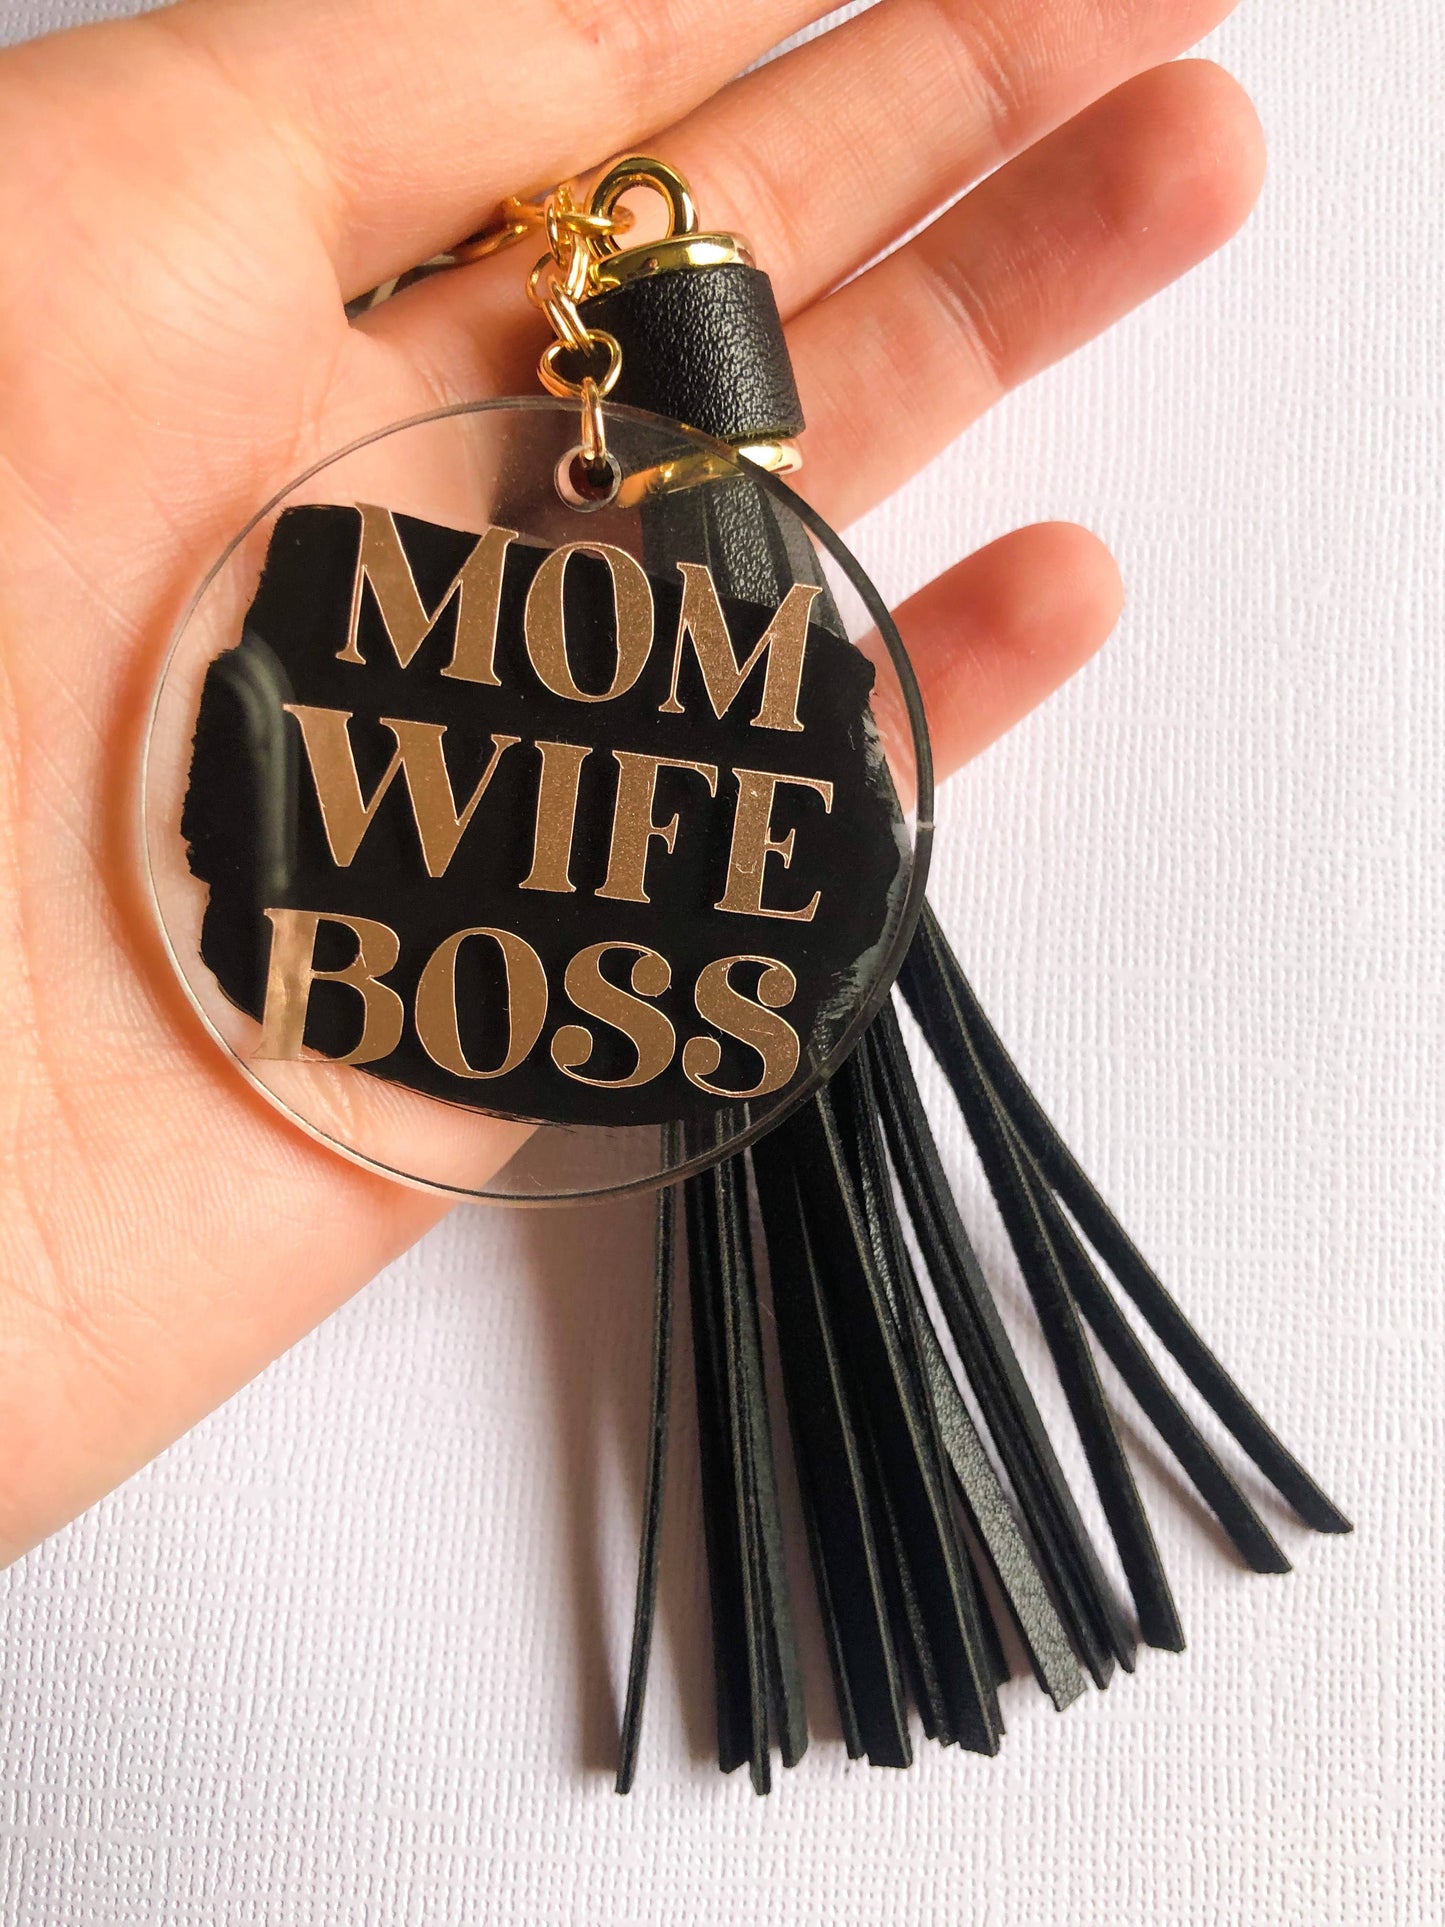 Salty Ocean Crew - Mom Wife Boss Hand Painted Acrylic Keychain Rose Gold/Rose